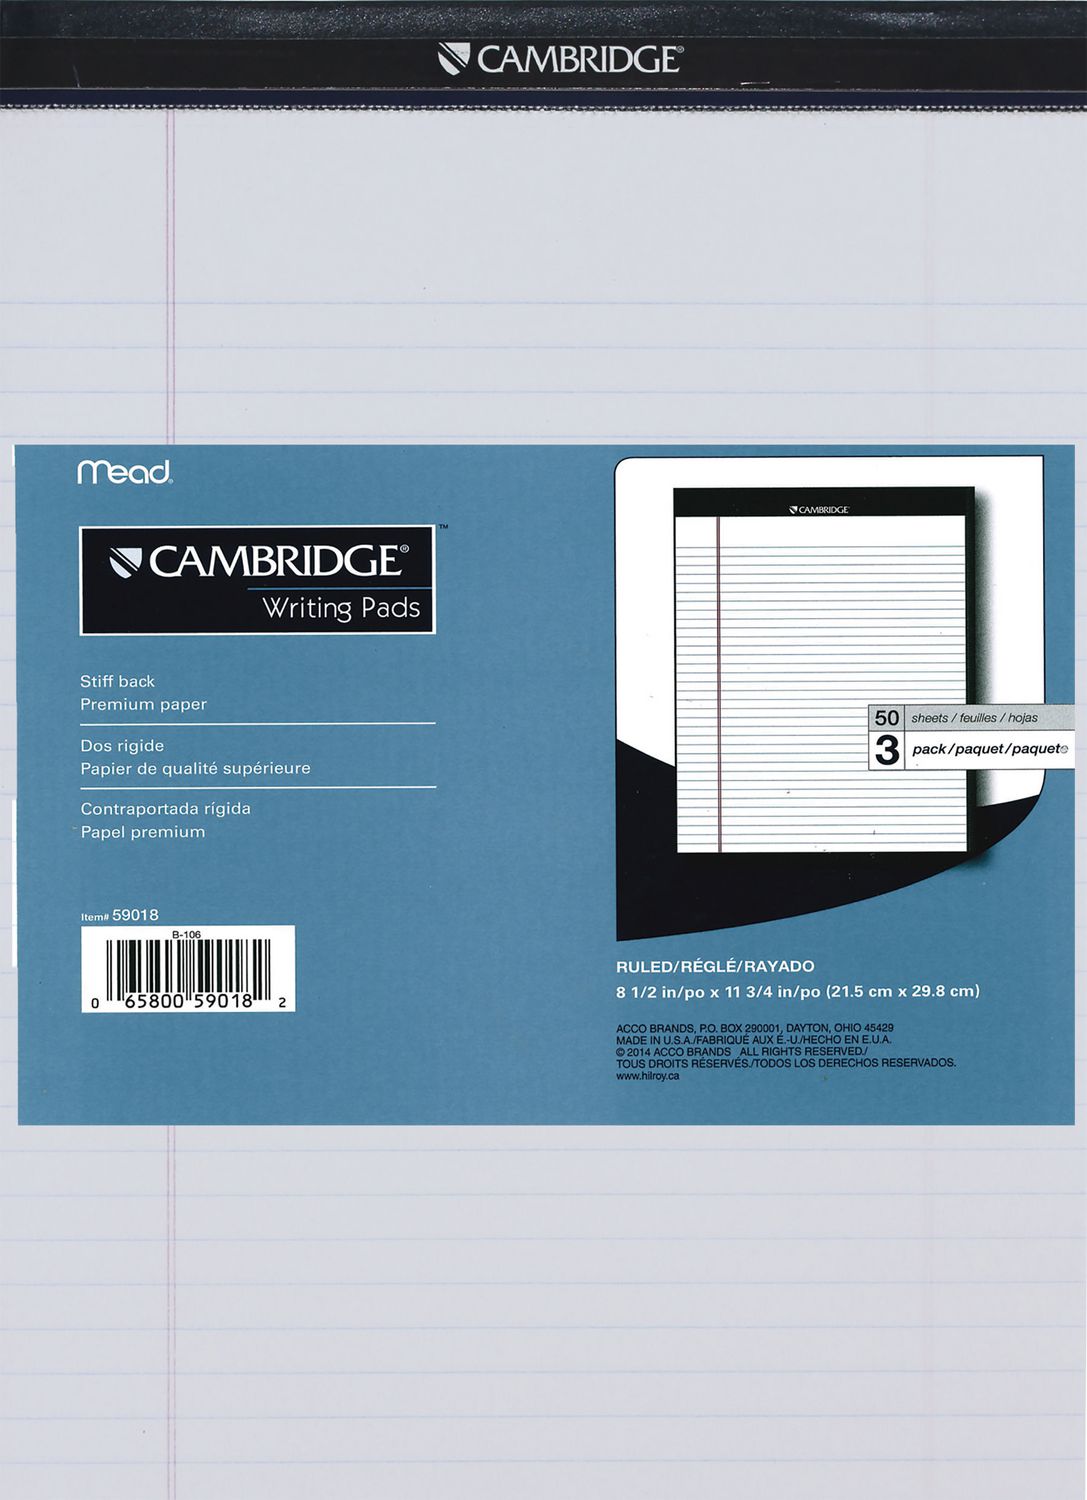 140 Sheets Wide Ruled Stiff Back 6 x 8 3/8 inches Mead Cambridge Writing Pads Pack of 2 